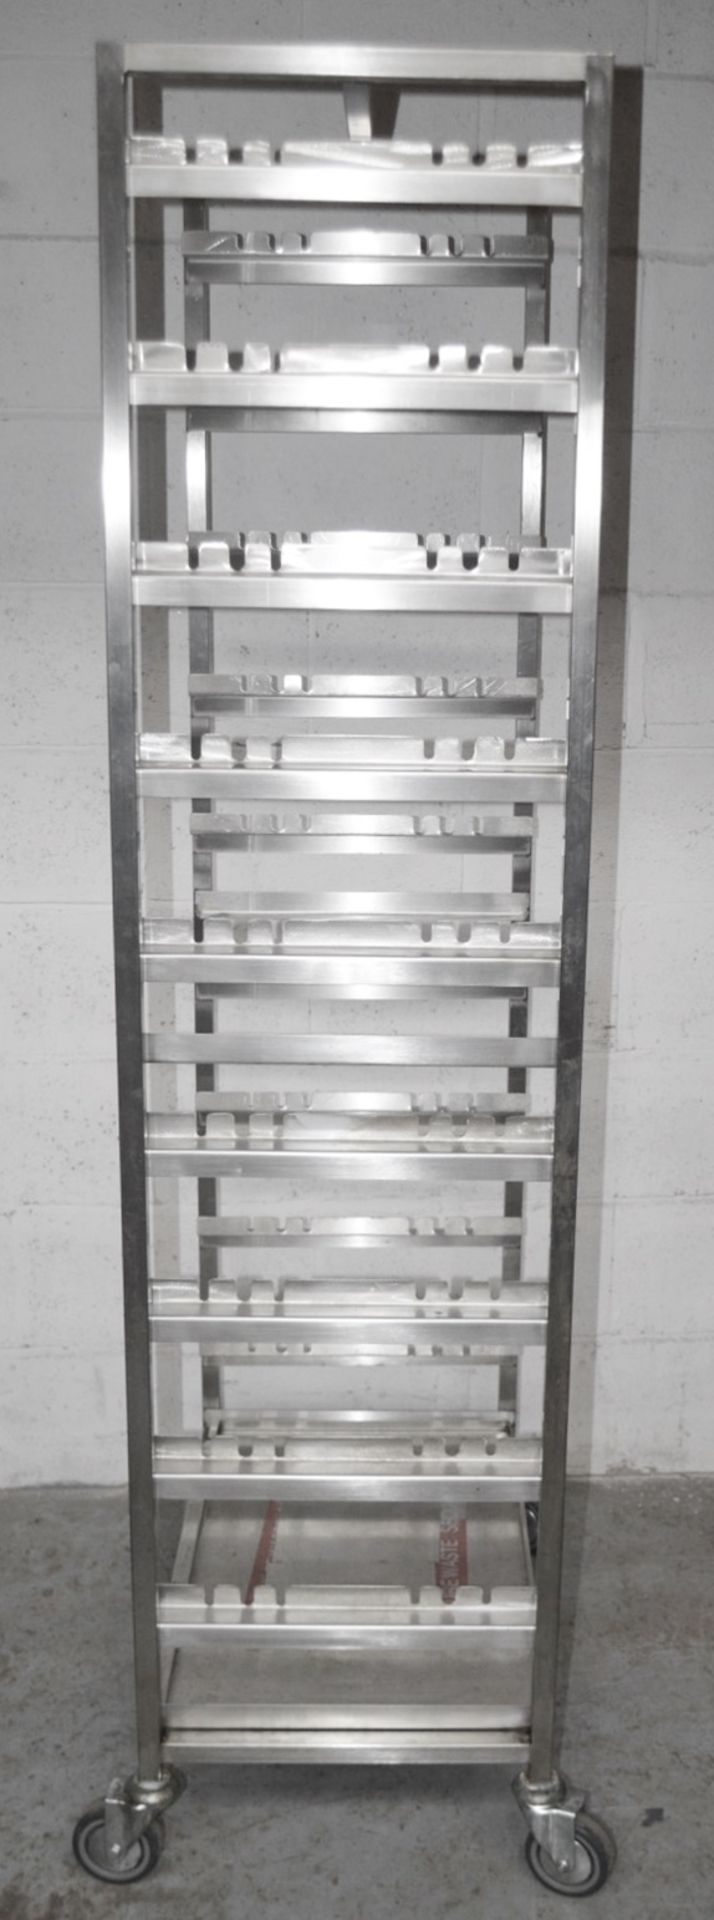 1 x Stainless Steel Commercial Kitchen 10-Grid Mobile Chicken / Meat Prep Rack - Includes Chicken Sk - Image 3 of 3